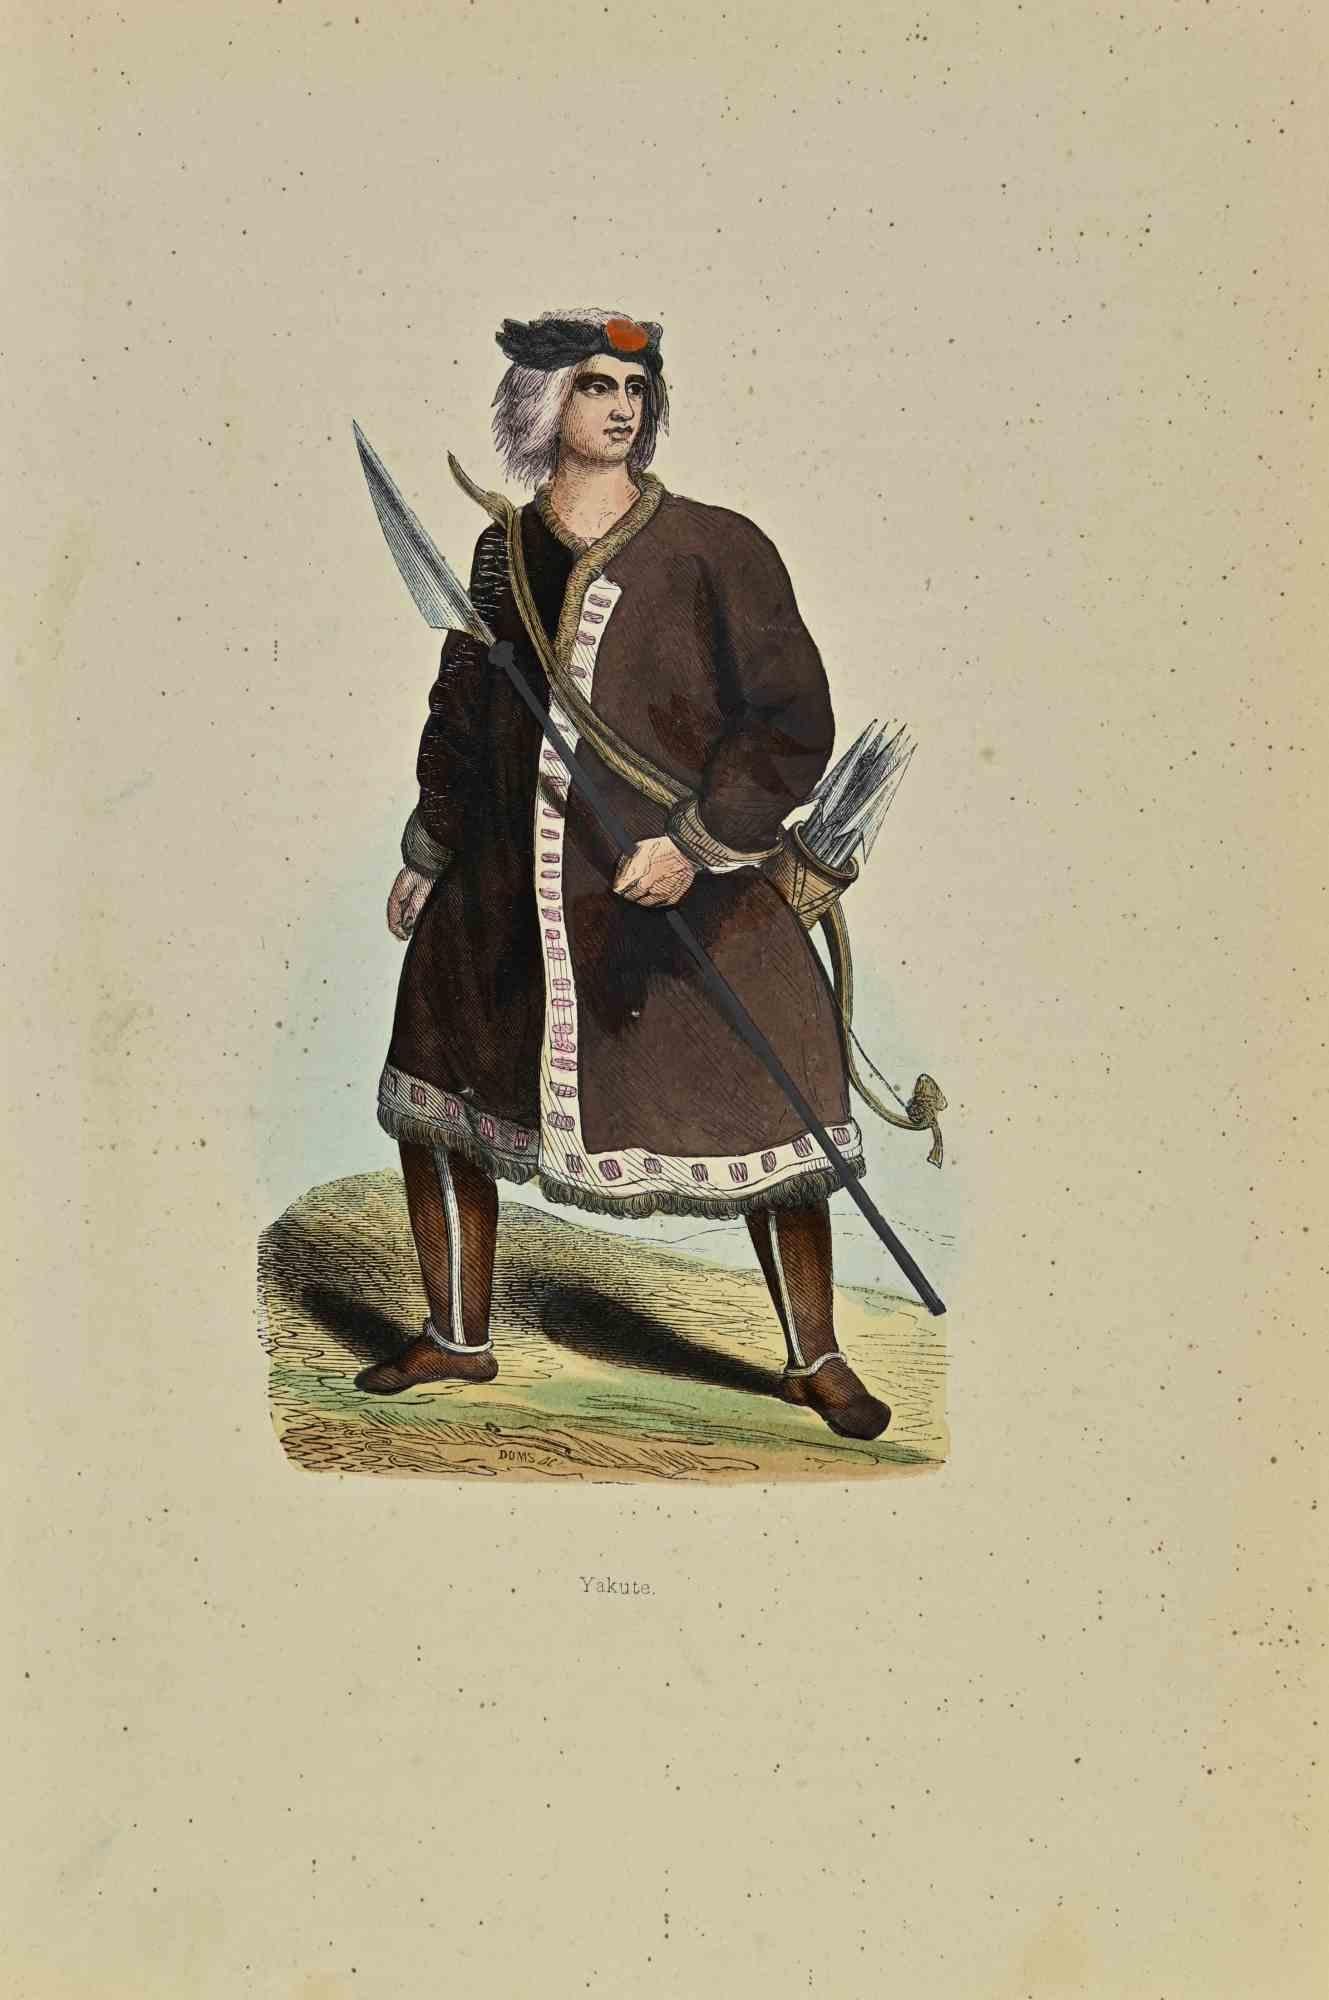 Yakut - Lithograph by Auguste Wahlen - 1844